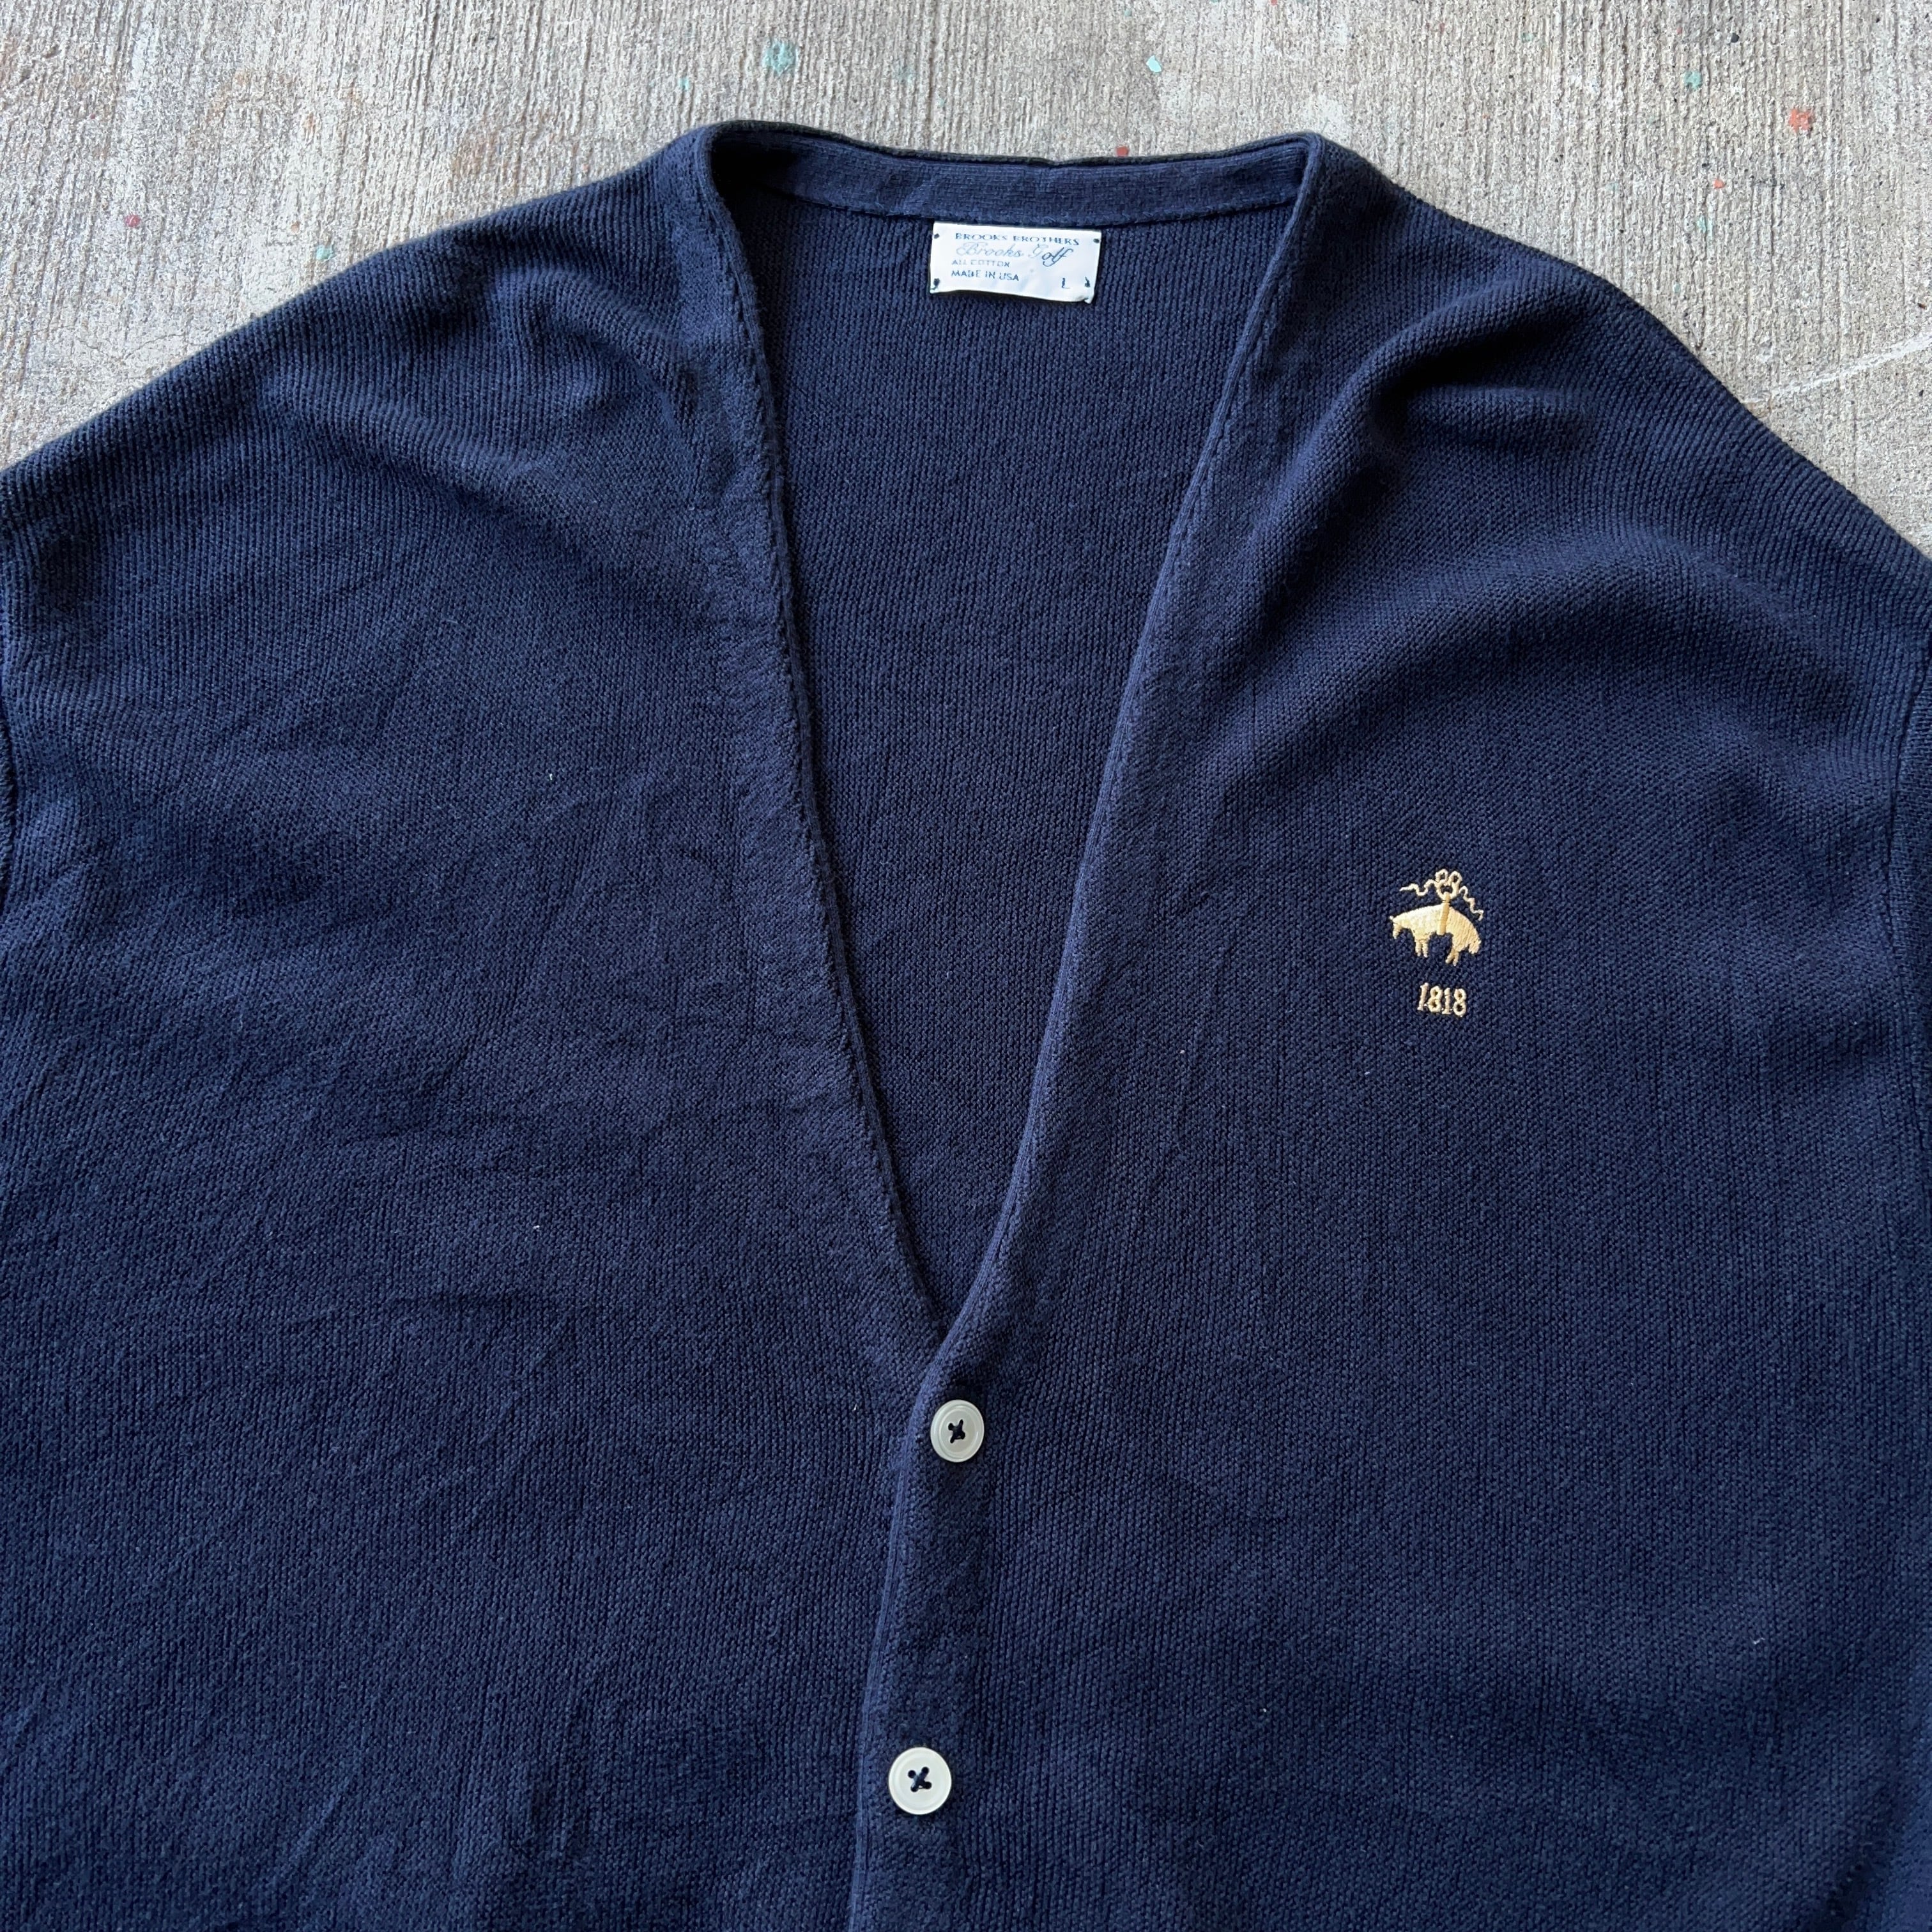 80's~90's USA製 BROOKS BROTHERS Cotton Cardigan SIZE L アメリカ製